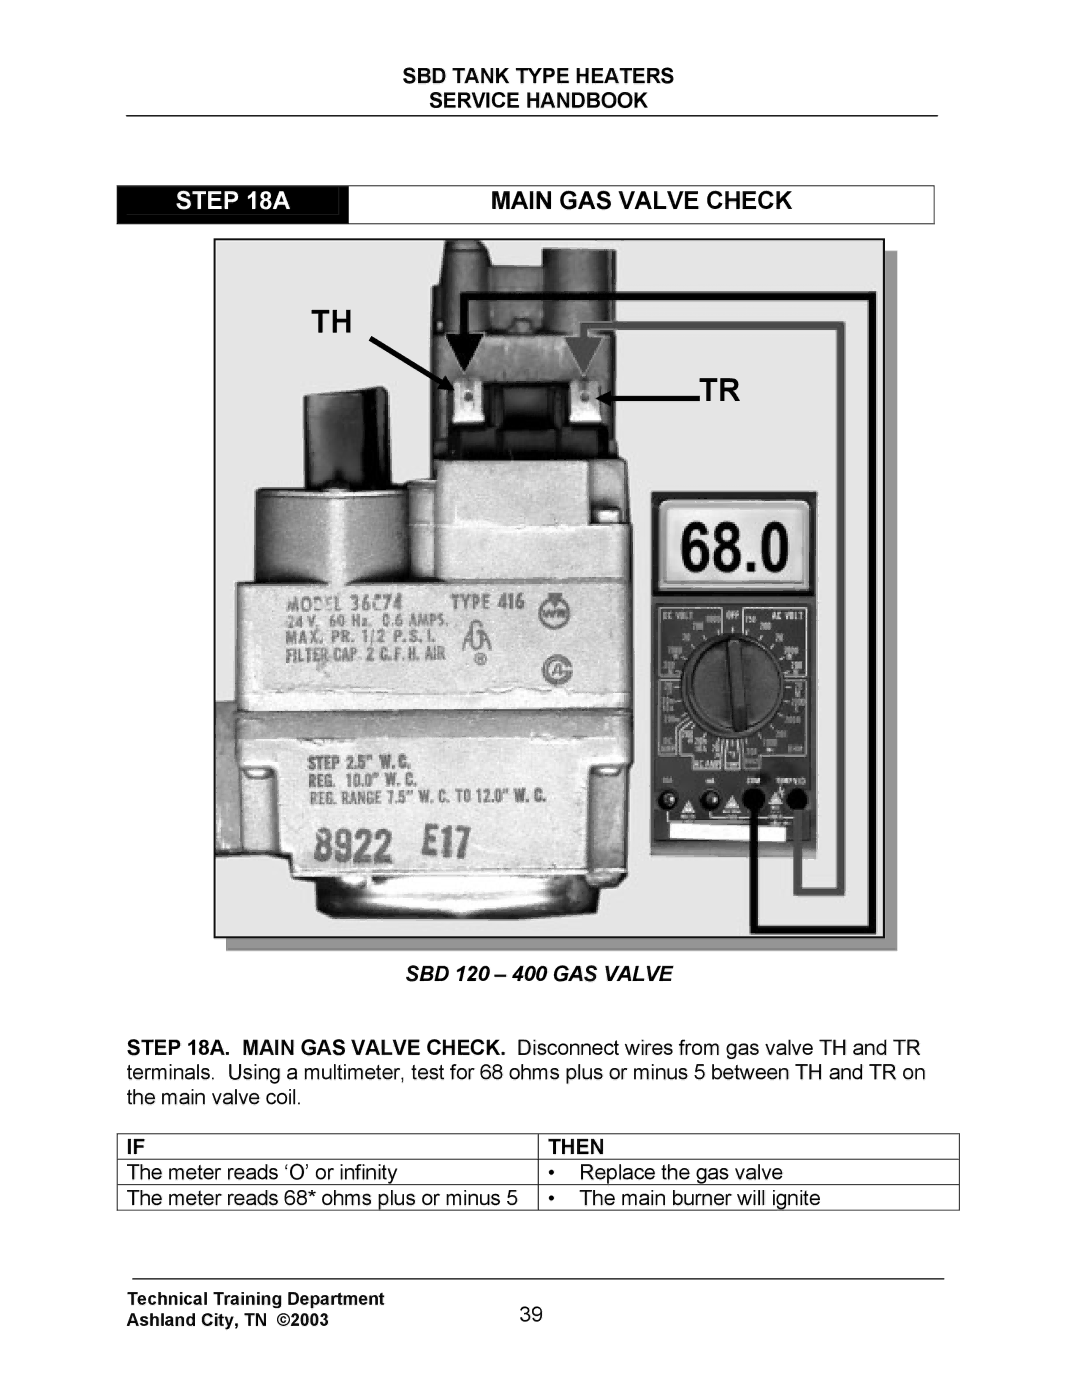 State Industries SBD85 500, SBD71 120 manual Main GAS Valve Check 